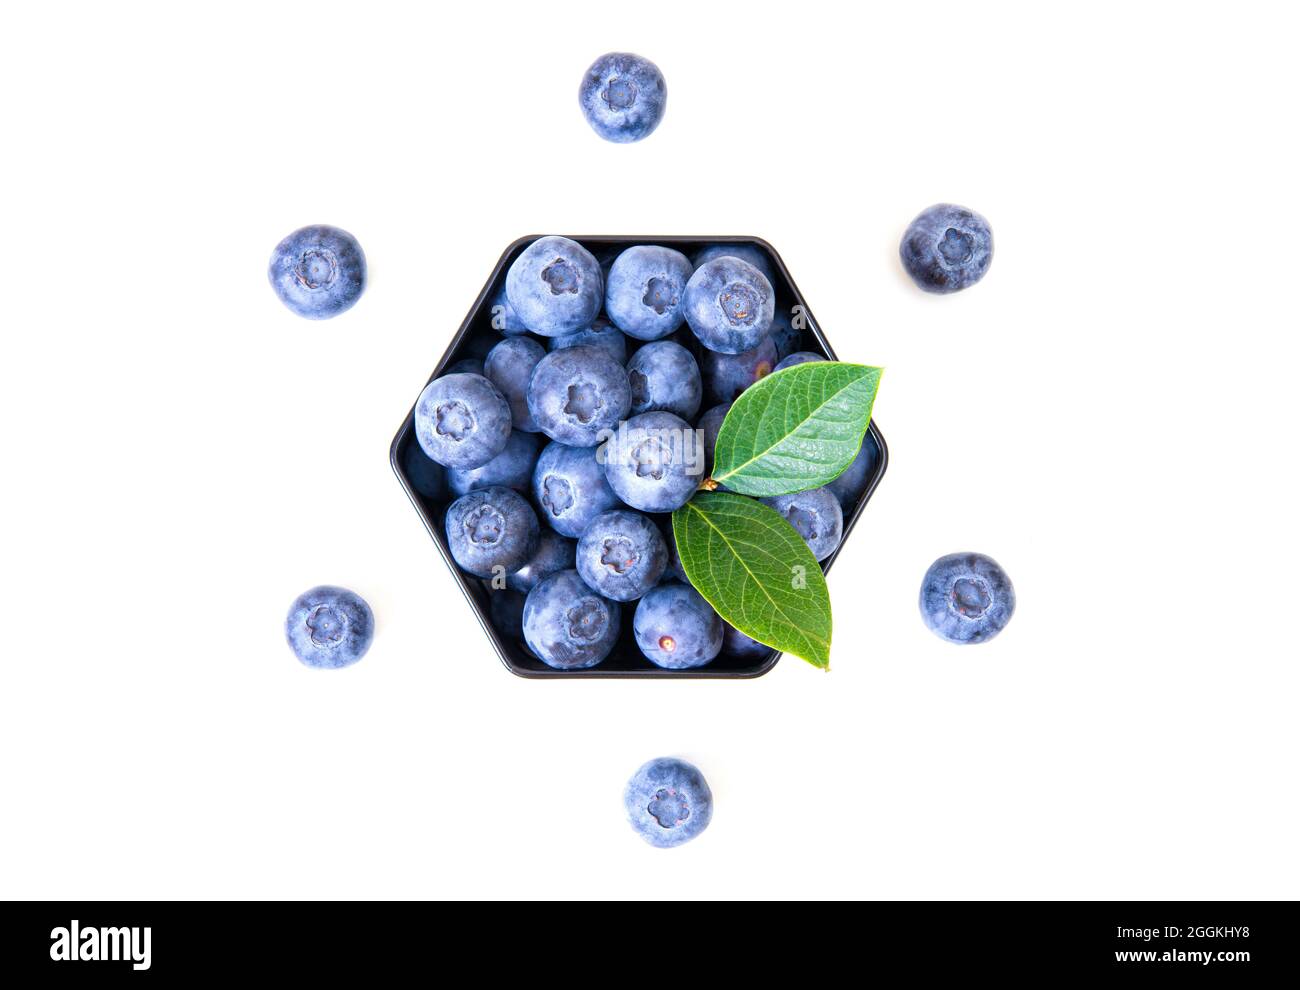 Blueberries in a hexagon box with green leaves on top isolated on white. Creative dessert composition. Stock Photo